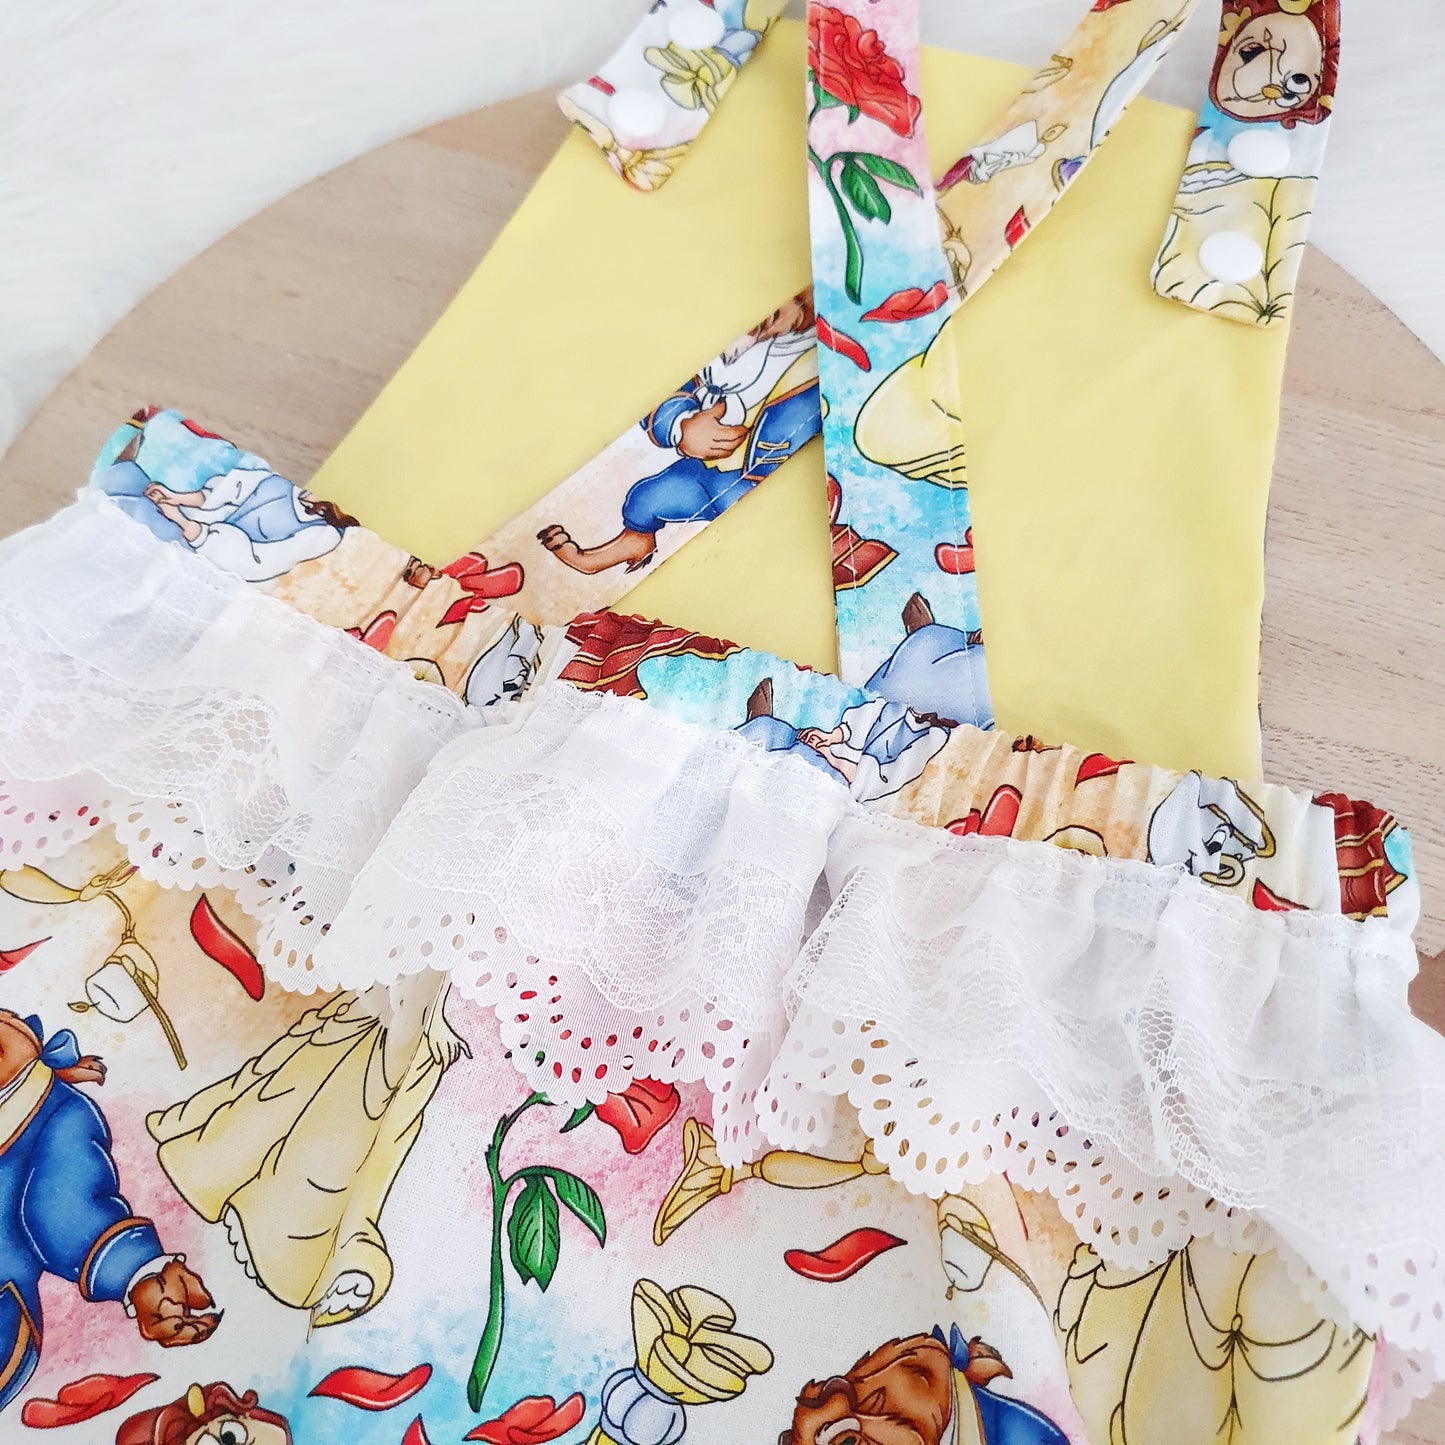 BELLE BEAUTY print Baby Romper with trim, Handmade Baby Clothing, Size 1 - 1st Birthday Clothing / Cake Smash Outfit, 12 - 18 months